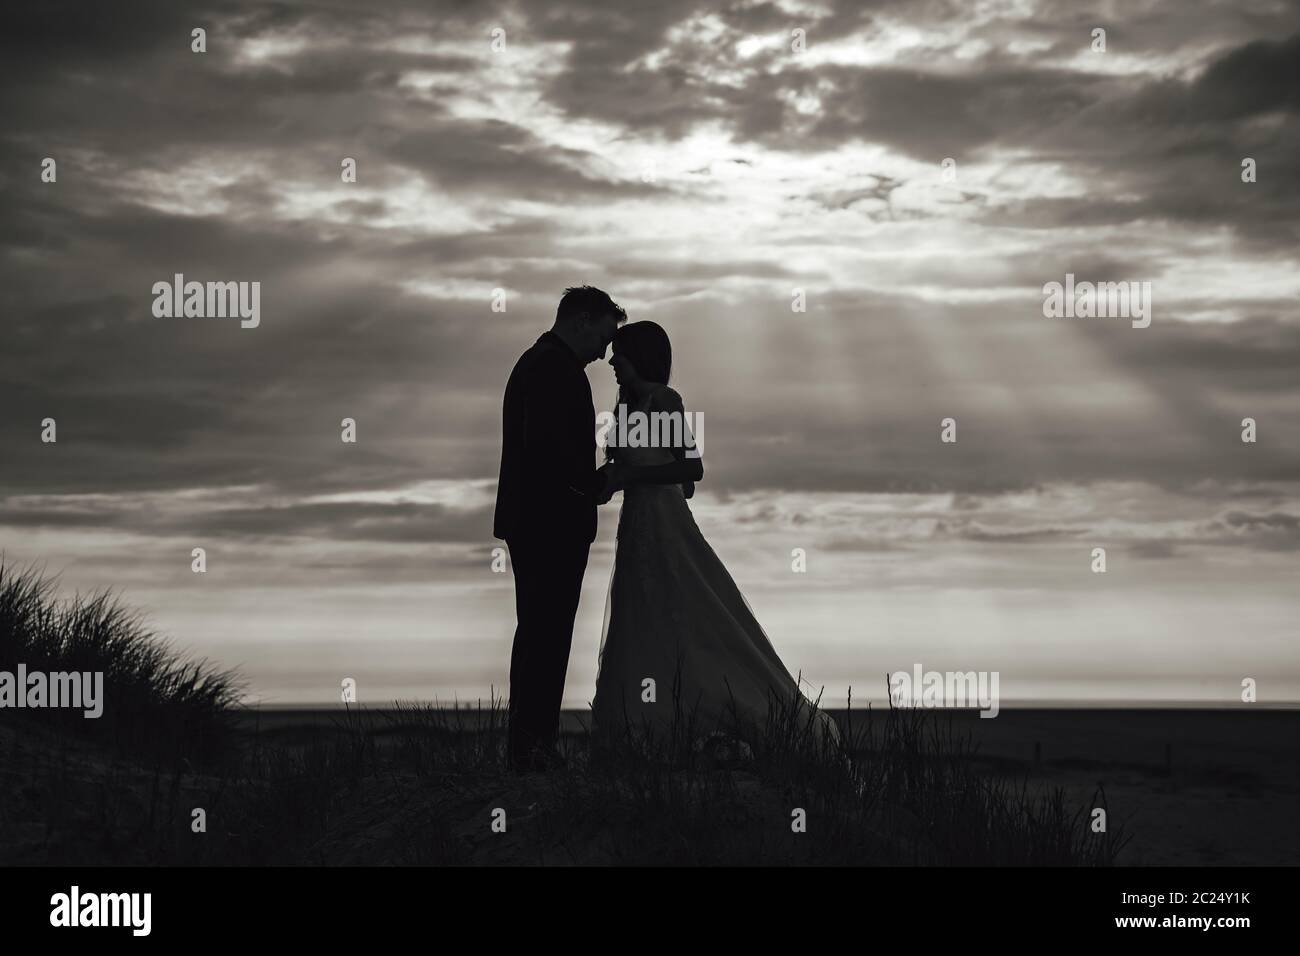 Black and white silhouette of wedding couple on beach. Dramatic sky with  sun rays among clouds in background. Happiness, love, confidence concept  Stock Photo - Alamy